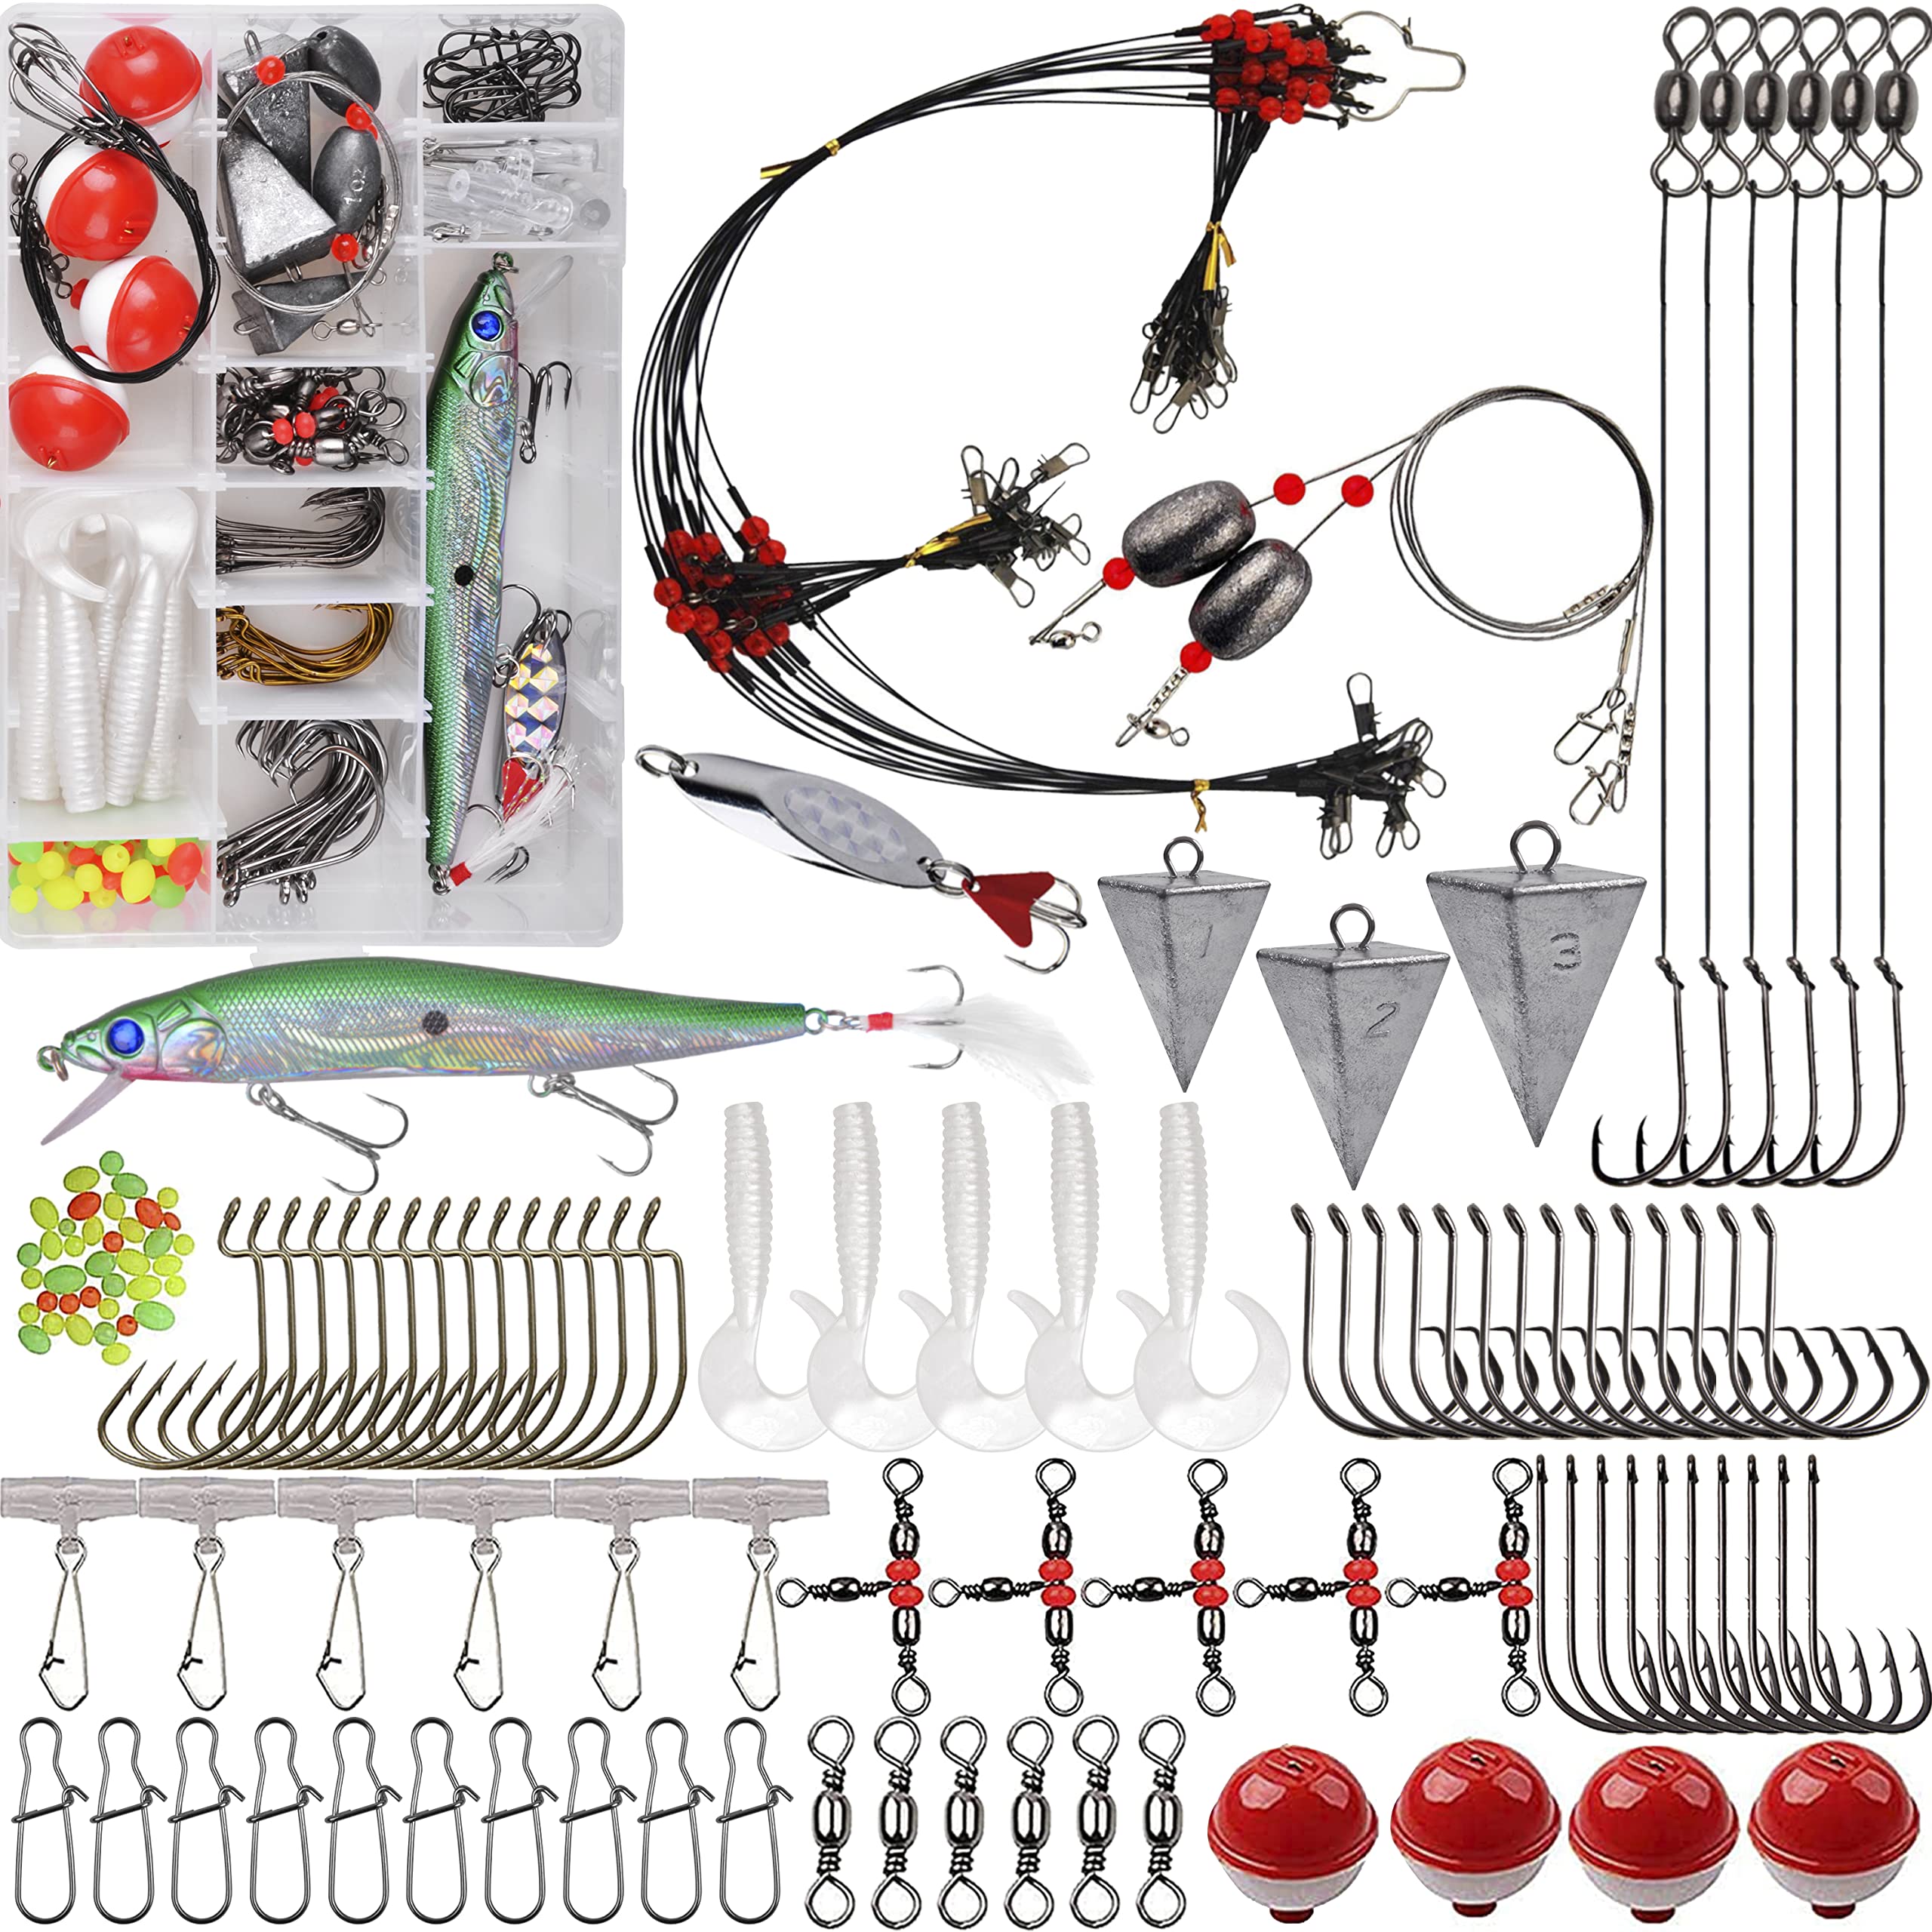 Saltwater Fishing Surf Fishing Rigs Tackle Kit - 138pcs Include Pyramid  Sinkers Saltwater Fishing Lures Hooks Leaders Swivels Snaps Beads Floats Beach  Fishing Gear